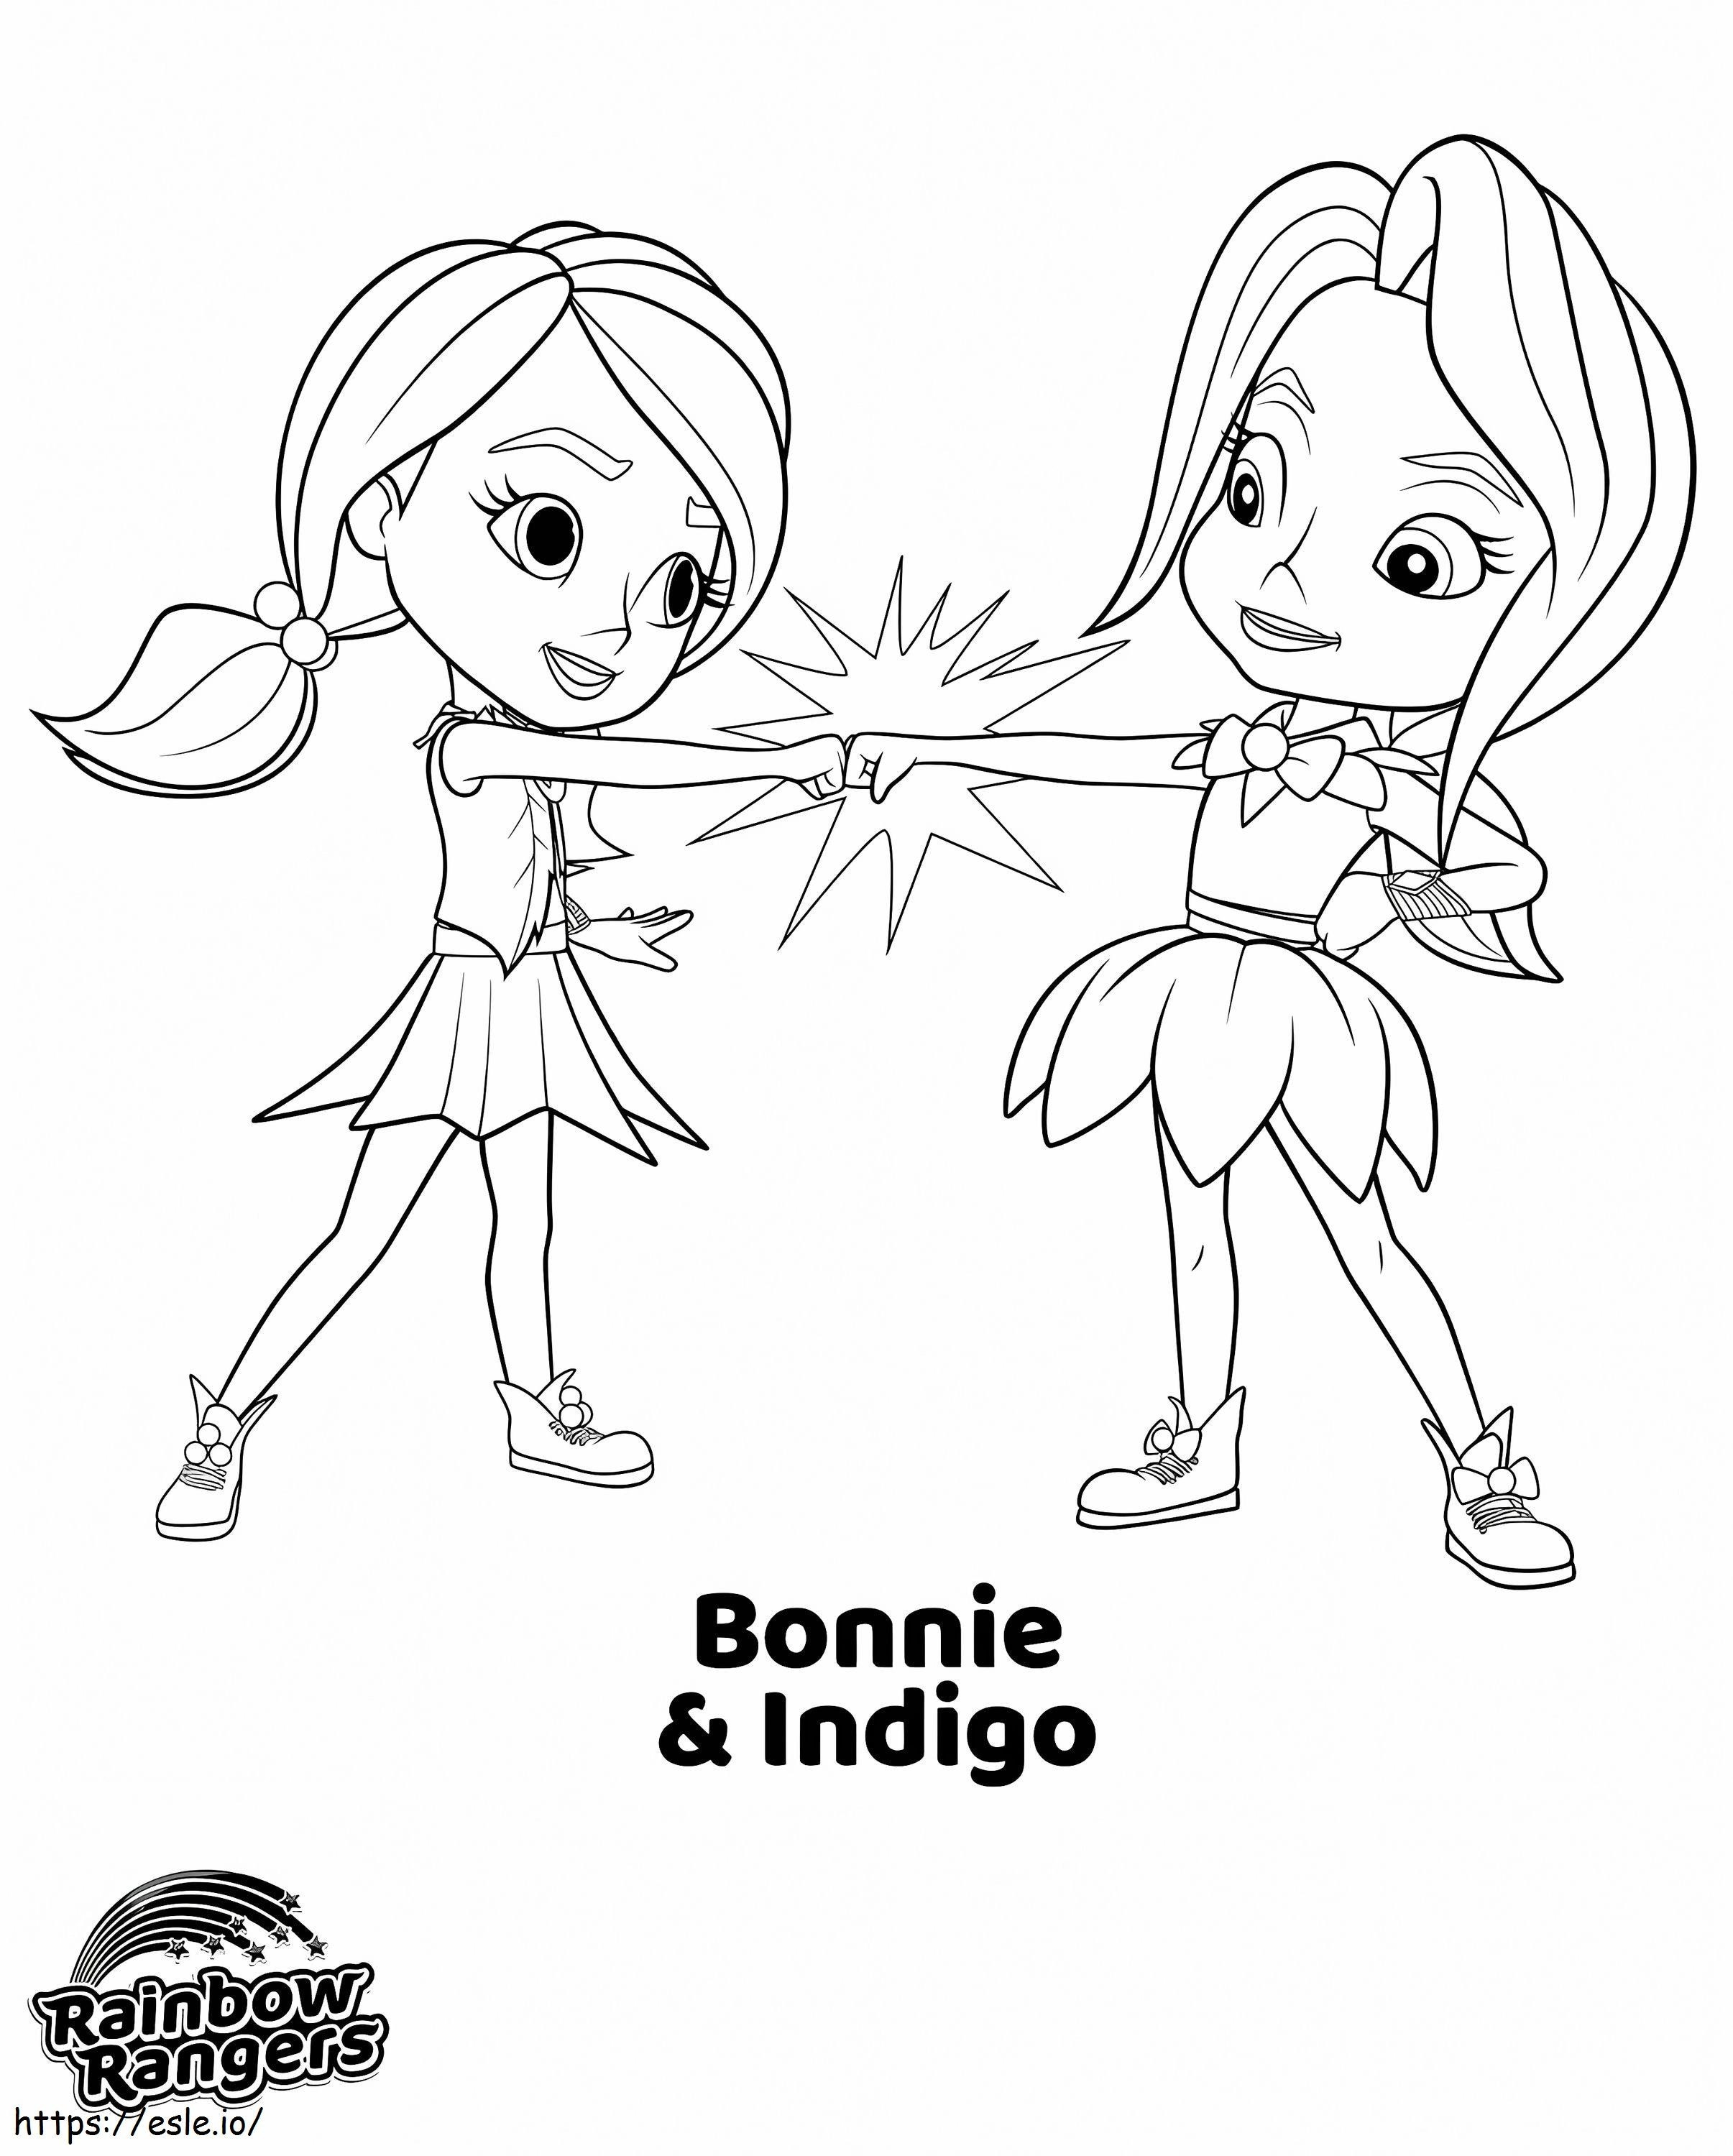 1596845612 9Isiqmw coloring page